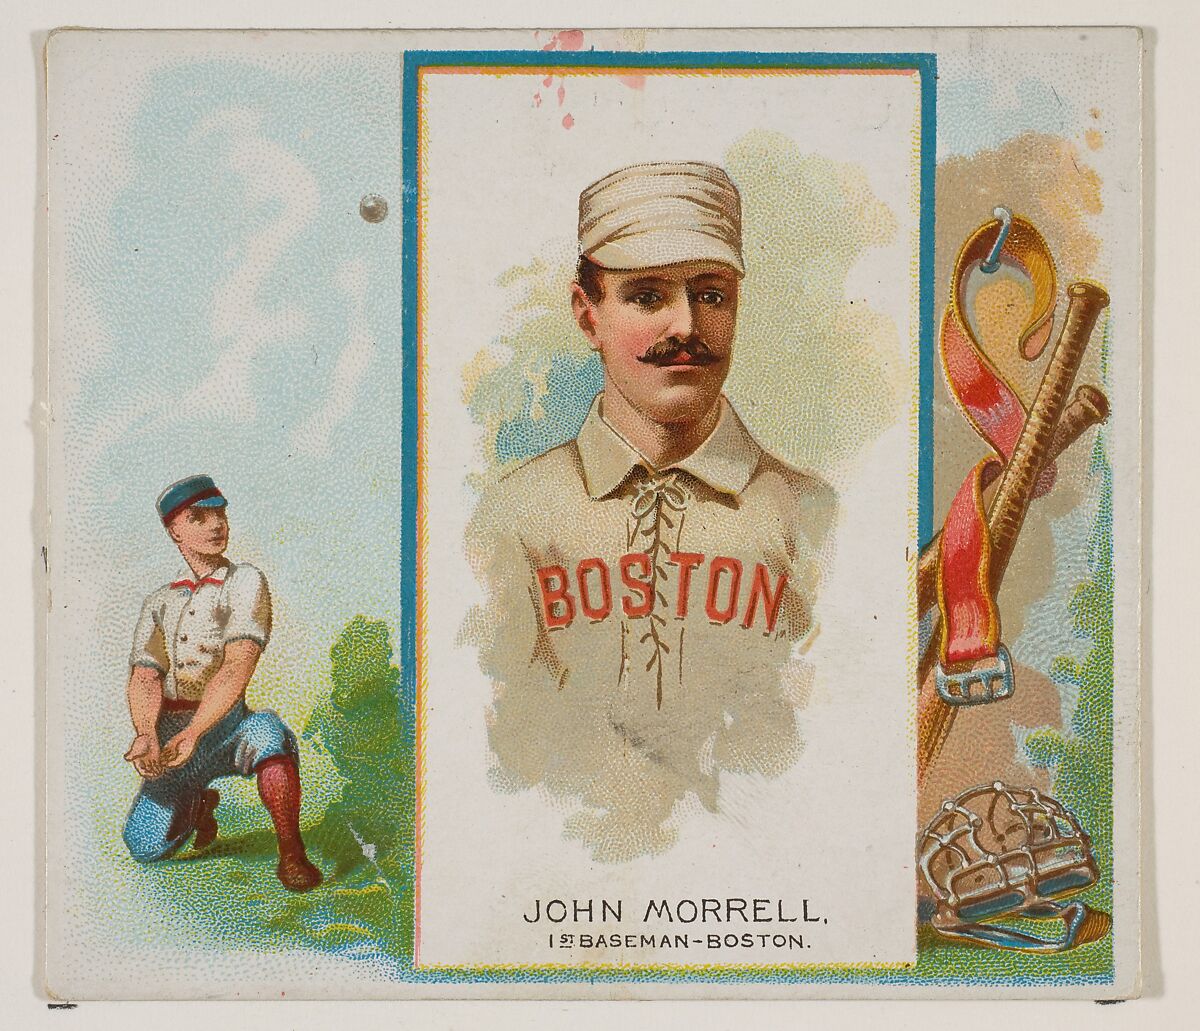 John Morrell, 1st Baseman, Boston, from World's Champions, Second Series (N43) for Allen & Ginter Cigarettes, Allen &amp; Ginter (American, Richmond, Virginia), Commercial lithograph 